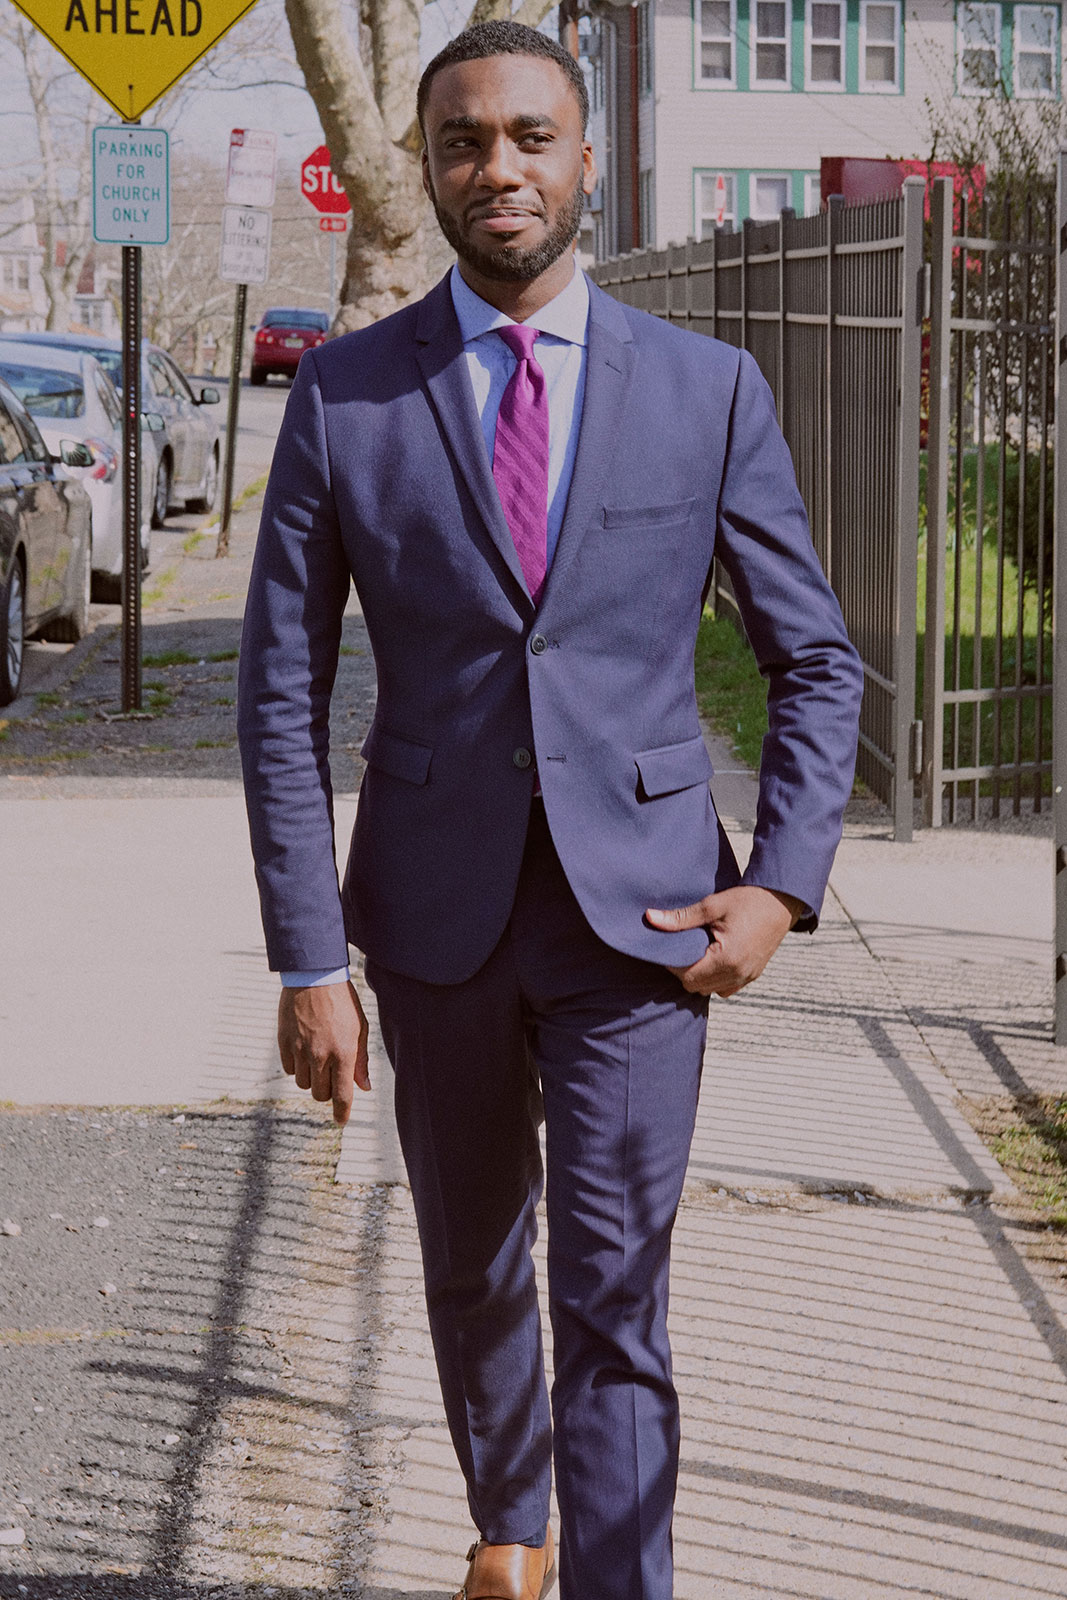 Professional man in suit walking outside and smiling